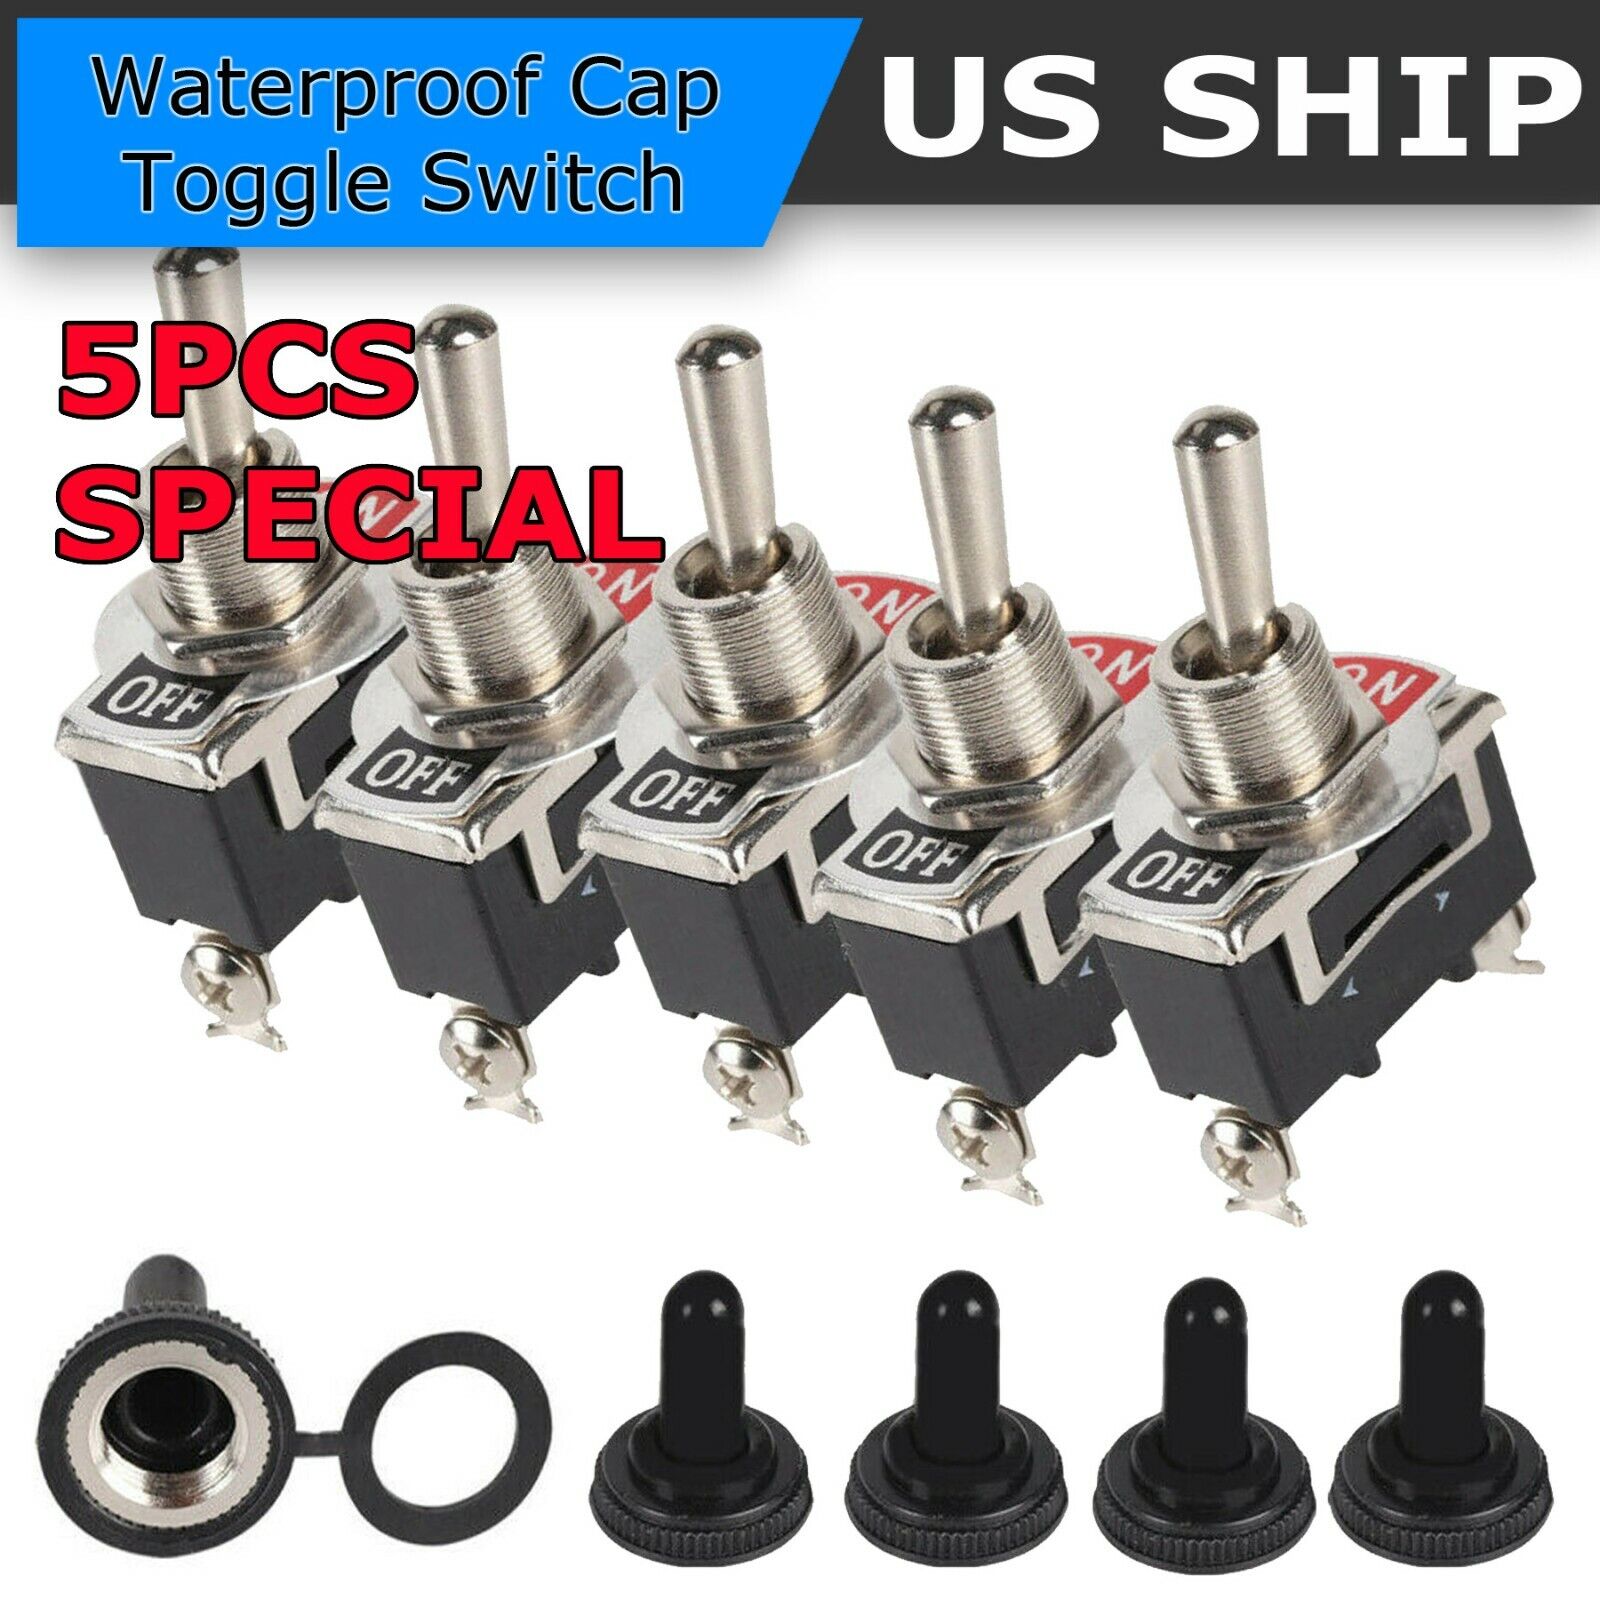 5X Toggle SWITCH ON/OFF Heavy Duty 15A 250V SPST 2 Terminal Car Boat Waterproof 